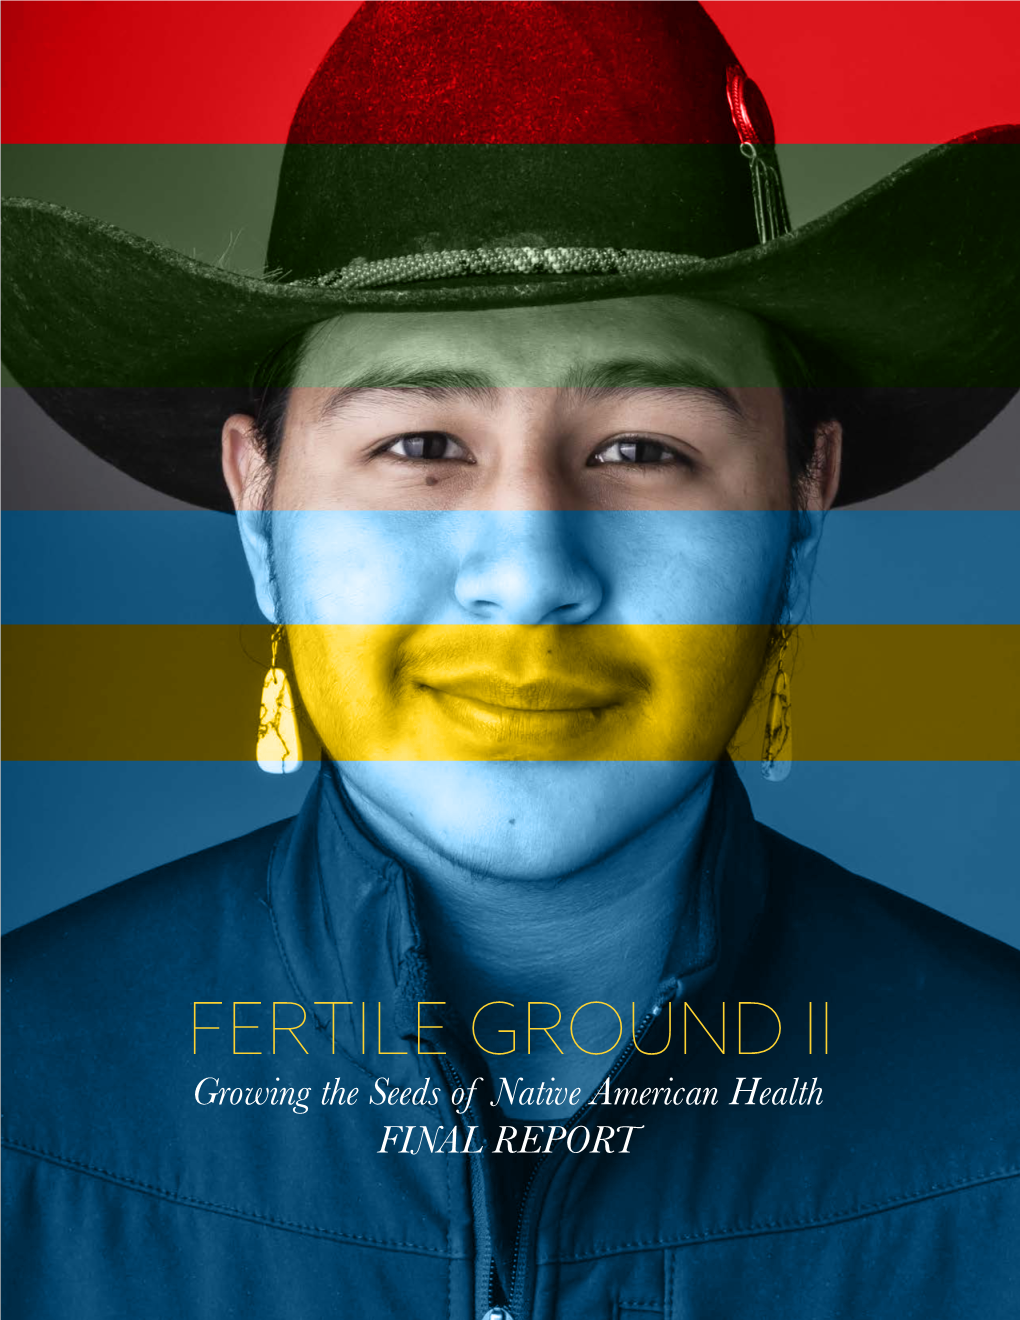 Download the Fertile Ground II Report